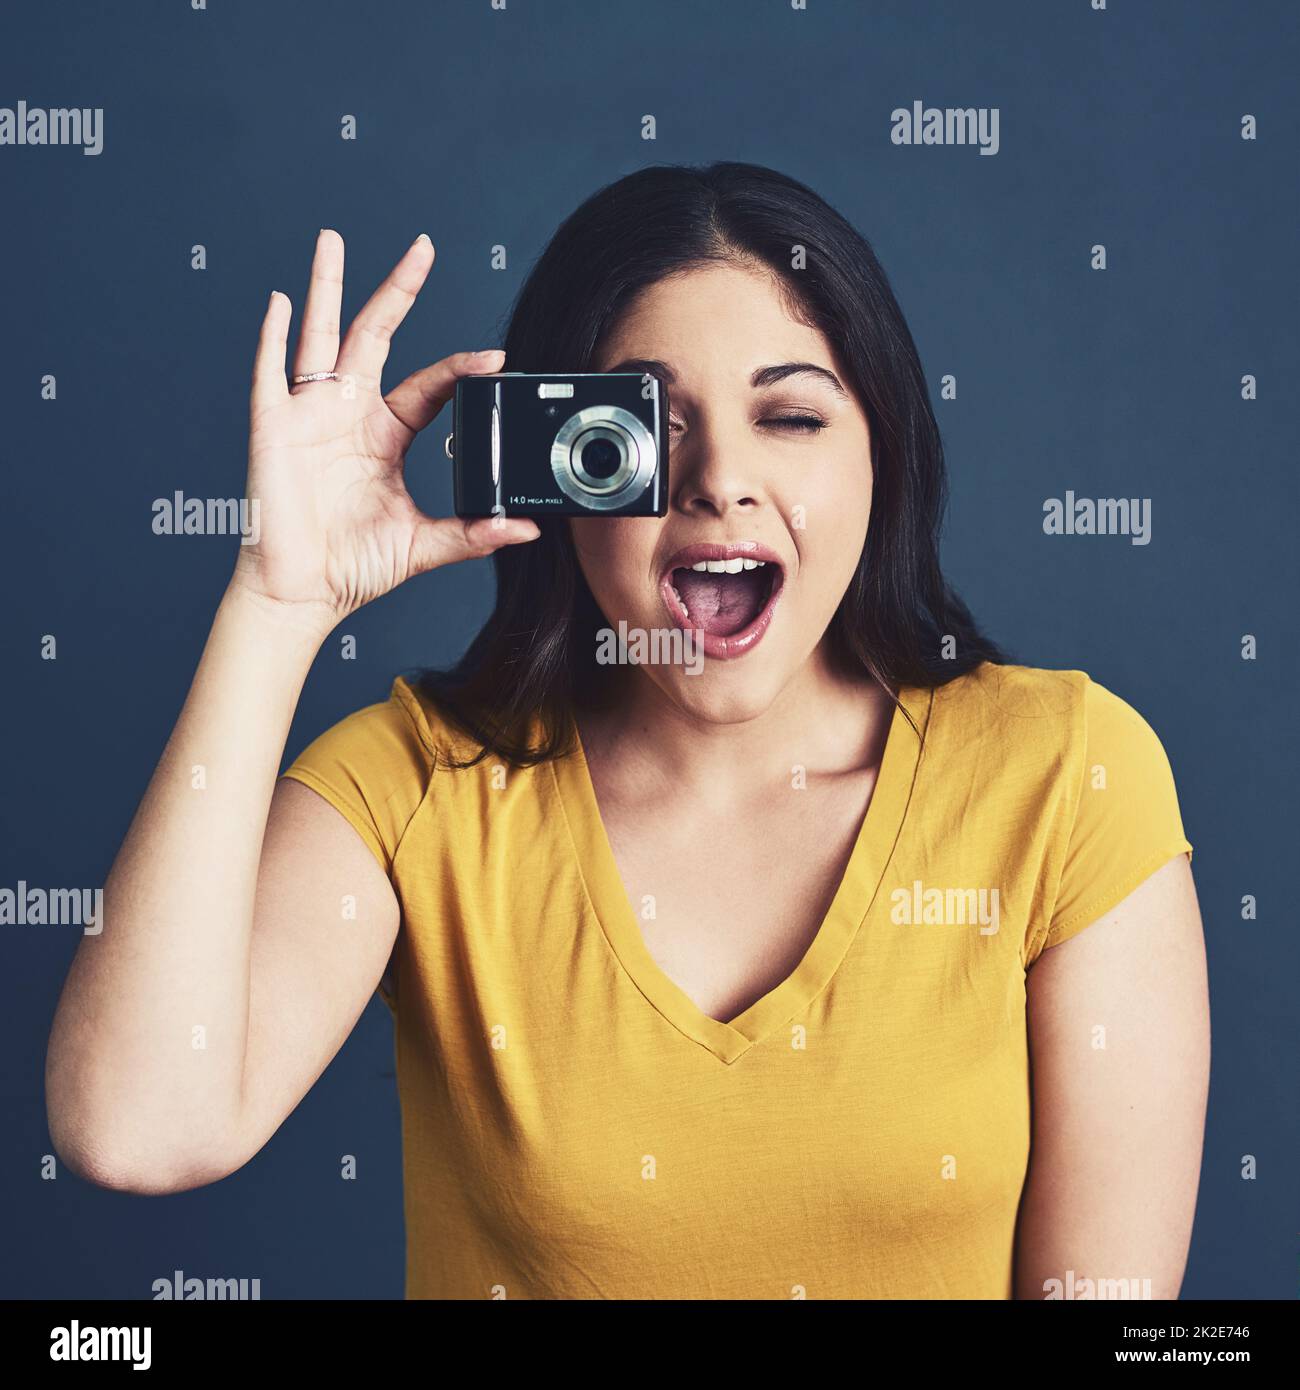 Youre so photogenic. Studio portrait of an attractive young woman taking a photo against a blue background. Stock Photo